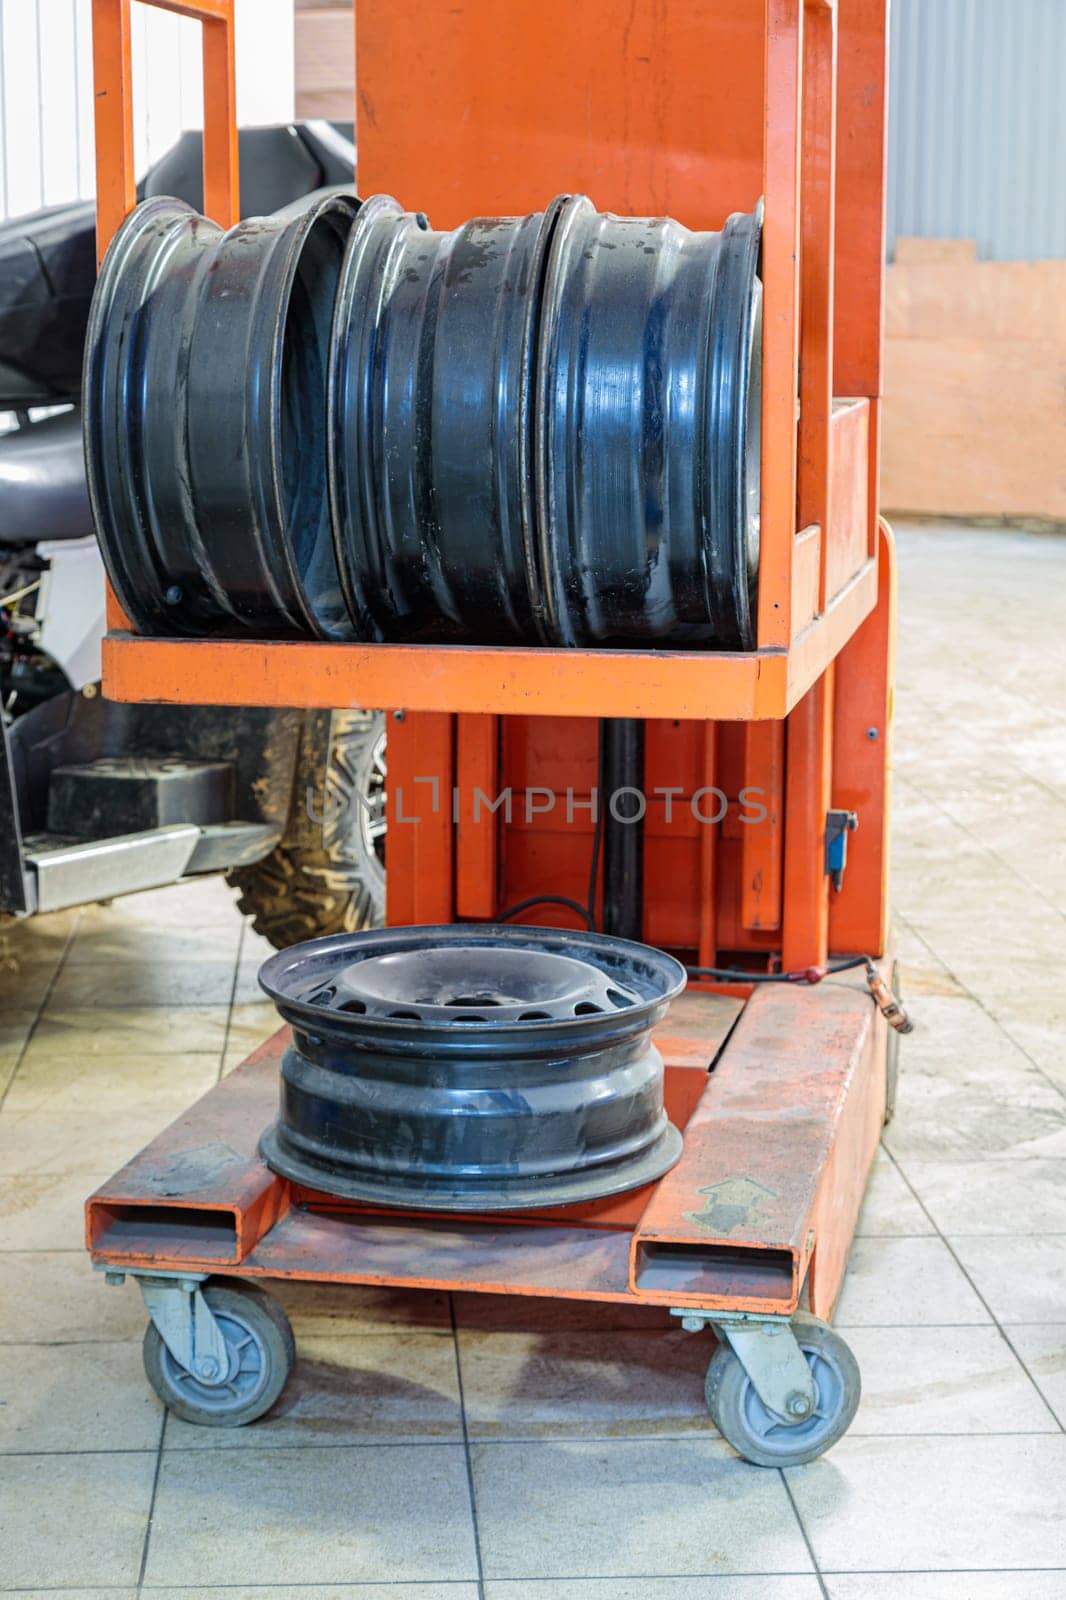 Metal discs for car wheels in a trolley. High quality photo